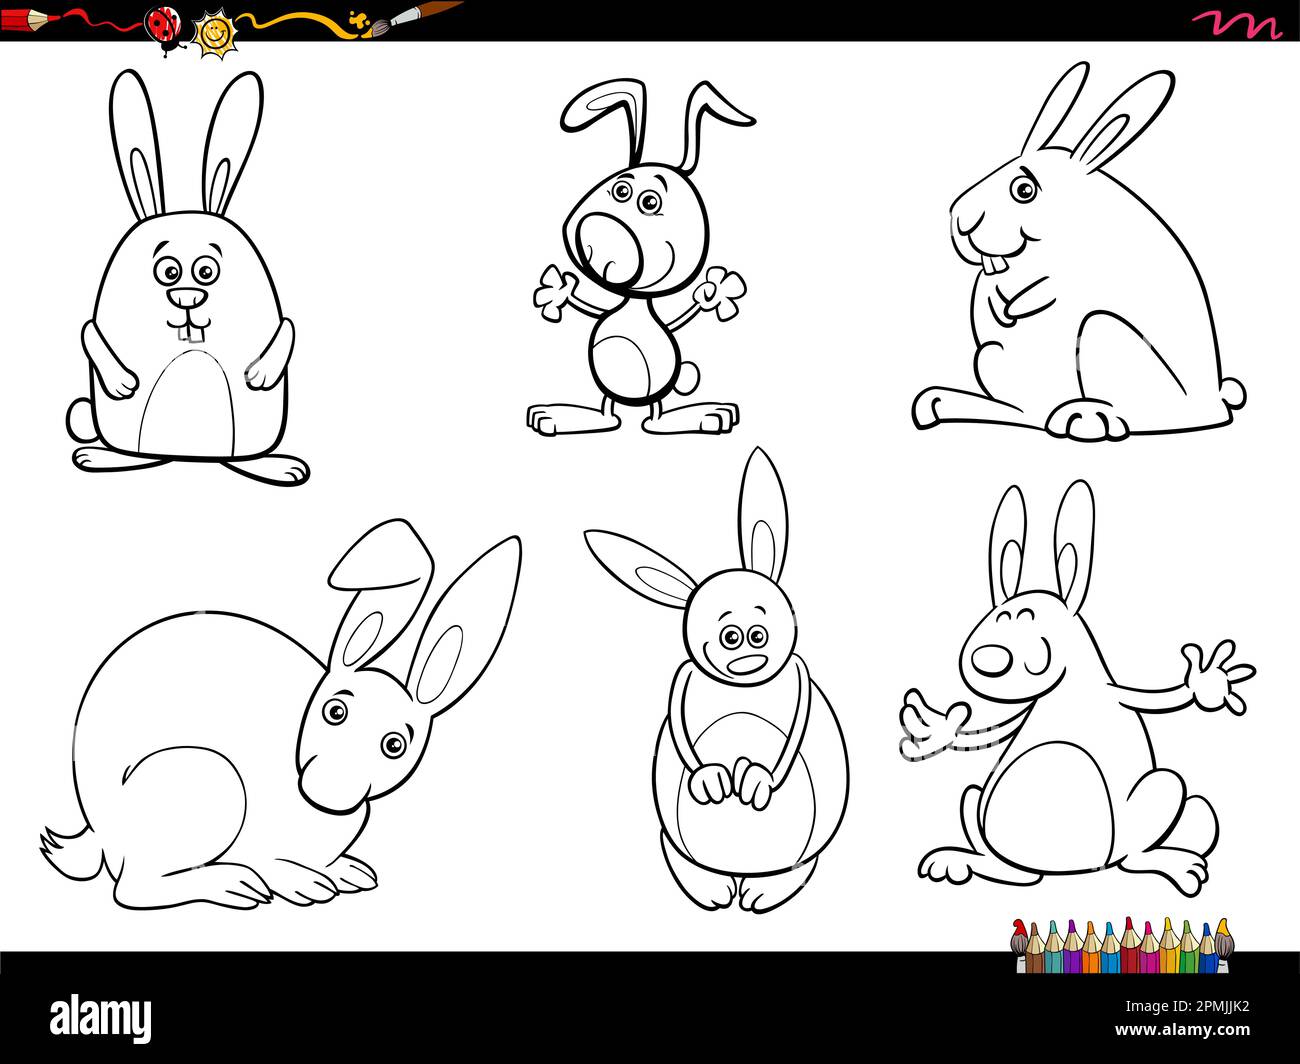 Black and white cartoon illustration of rabbits animal characters set coloring page Stock Vector